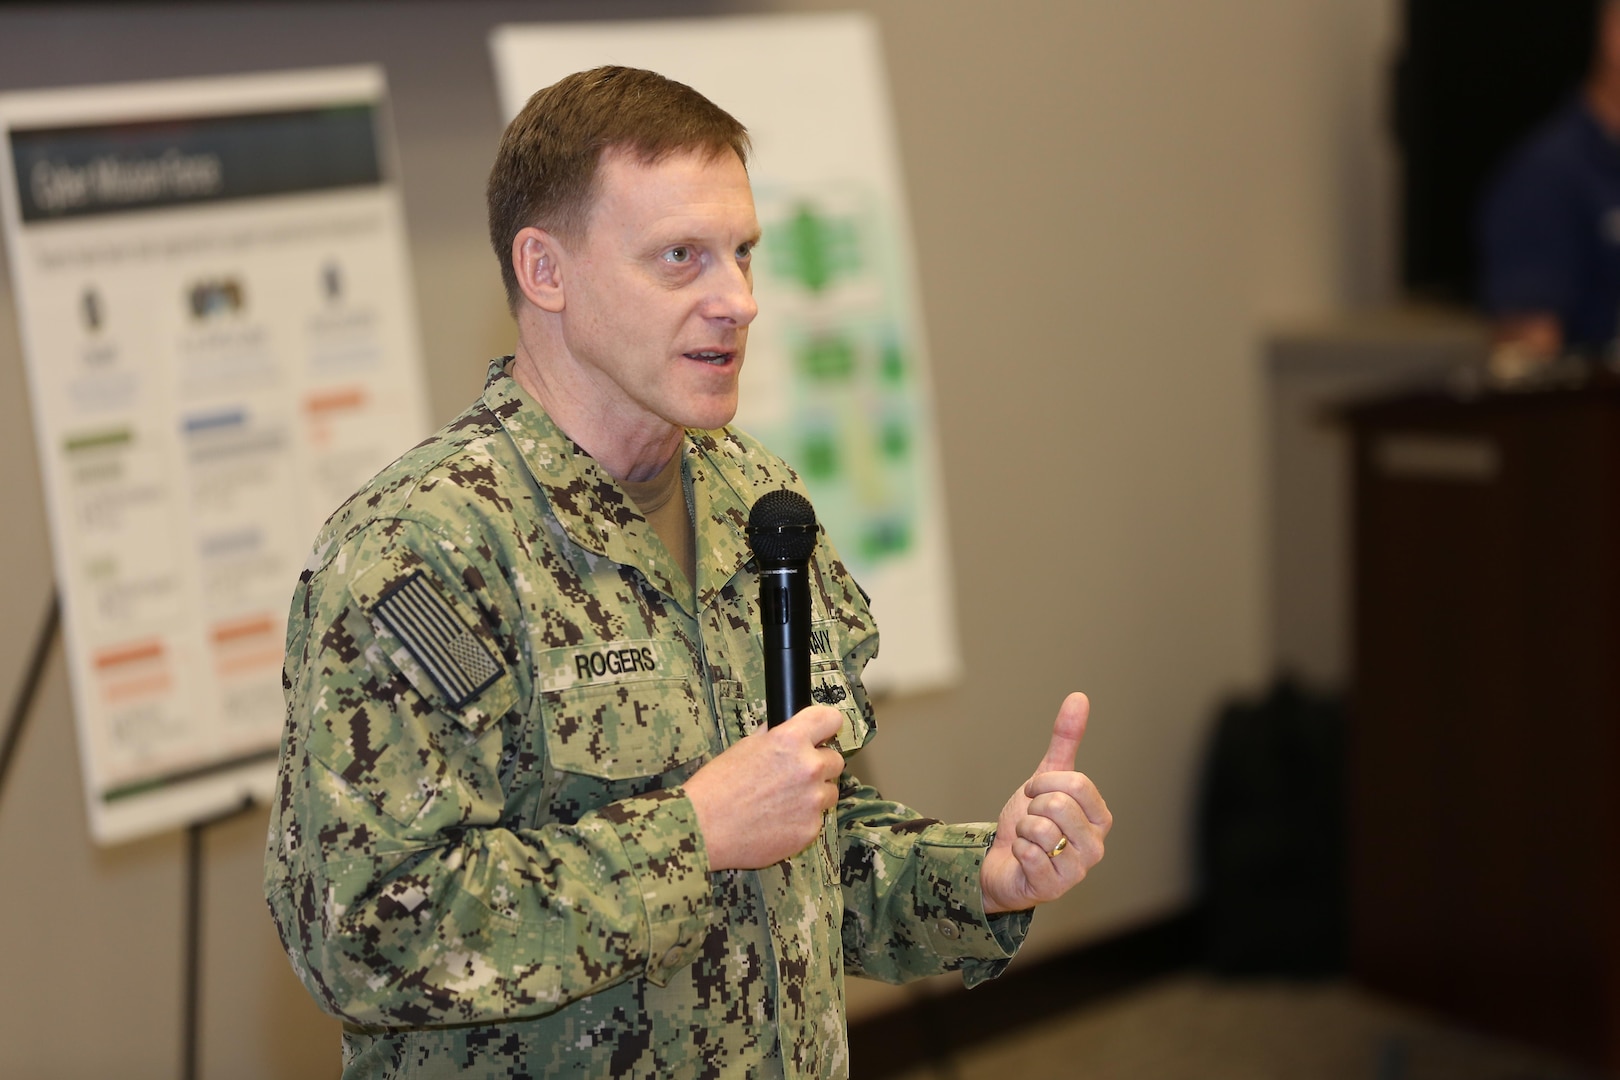 Navy Adm. Michael S. Rogers, Commander, USCYBERCOM, gives remarks at the 2017 Cyber Guard exercise June 12, 2017. Cyber Guard is a weeklong exercise conducted in June to test and exercise the men and women of U.S. Cyber Command's Cyber Mission Force and interagency partner teams from across federal and state organizations tasked with defending critical infrastructure. During his opening remarks, Rogers set the tone regarding the challenge of the exercise. "What I constantly tell the team leads is it's about pushing the envelope. It's about challenging your teams, and it's about trying different things."